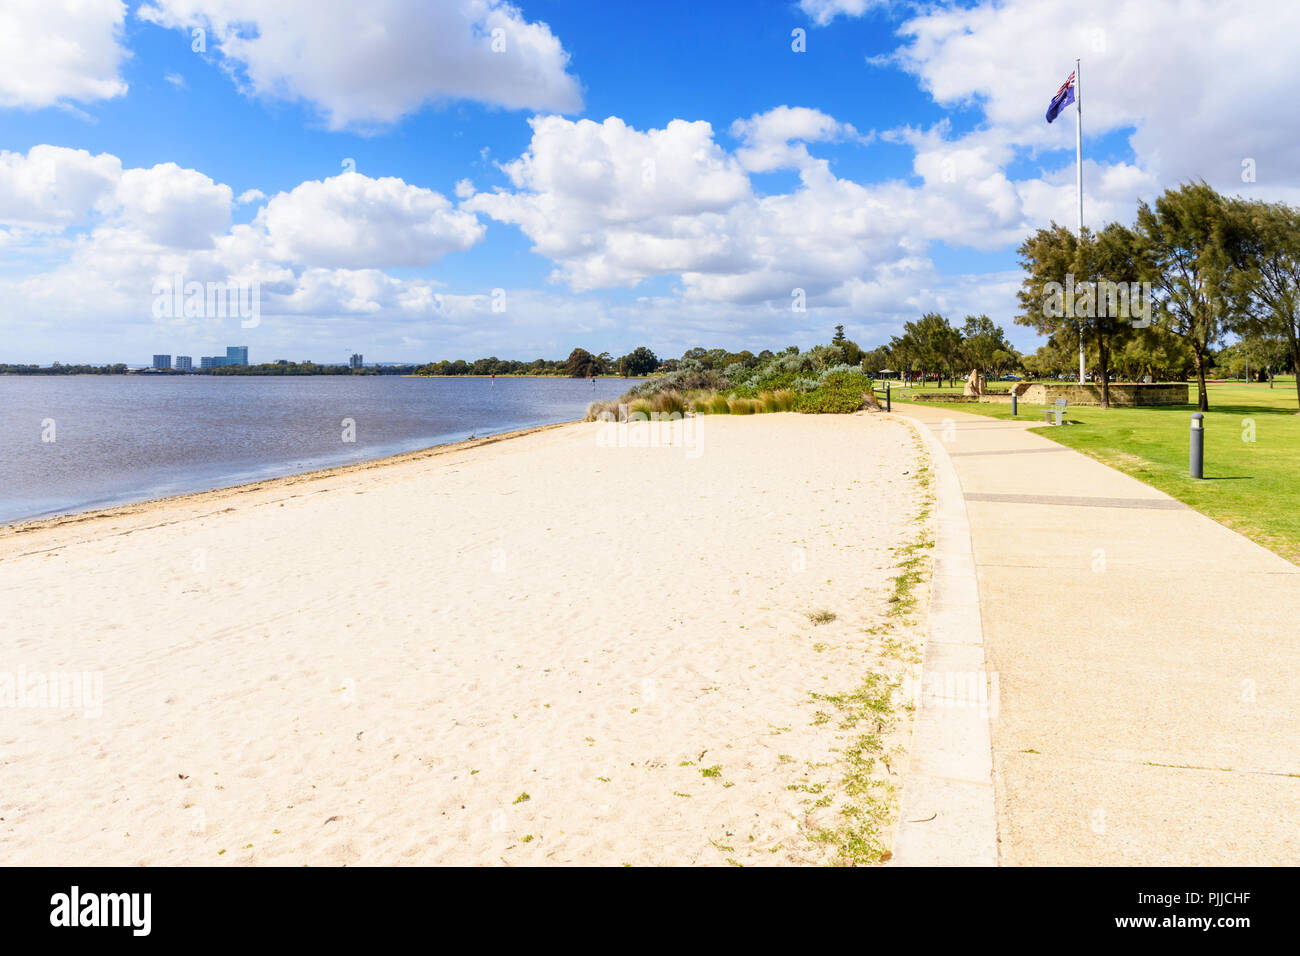 Sir James Mitchell Park beaches along the foreshore of the Swan River in the City of South Perth, Western Australia Stock Photo